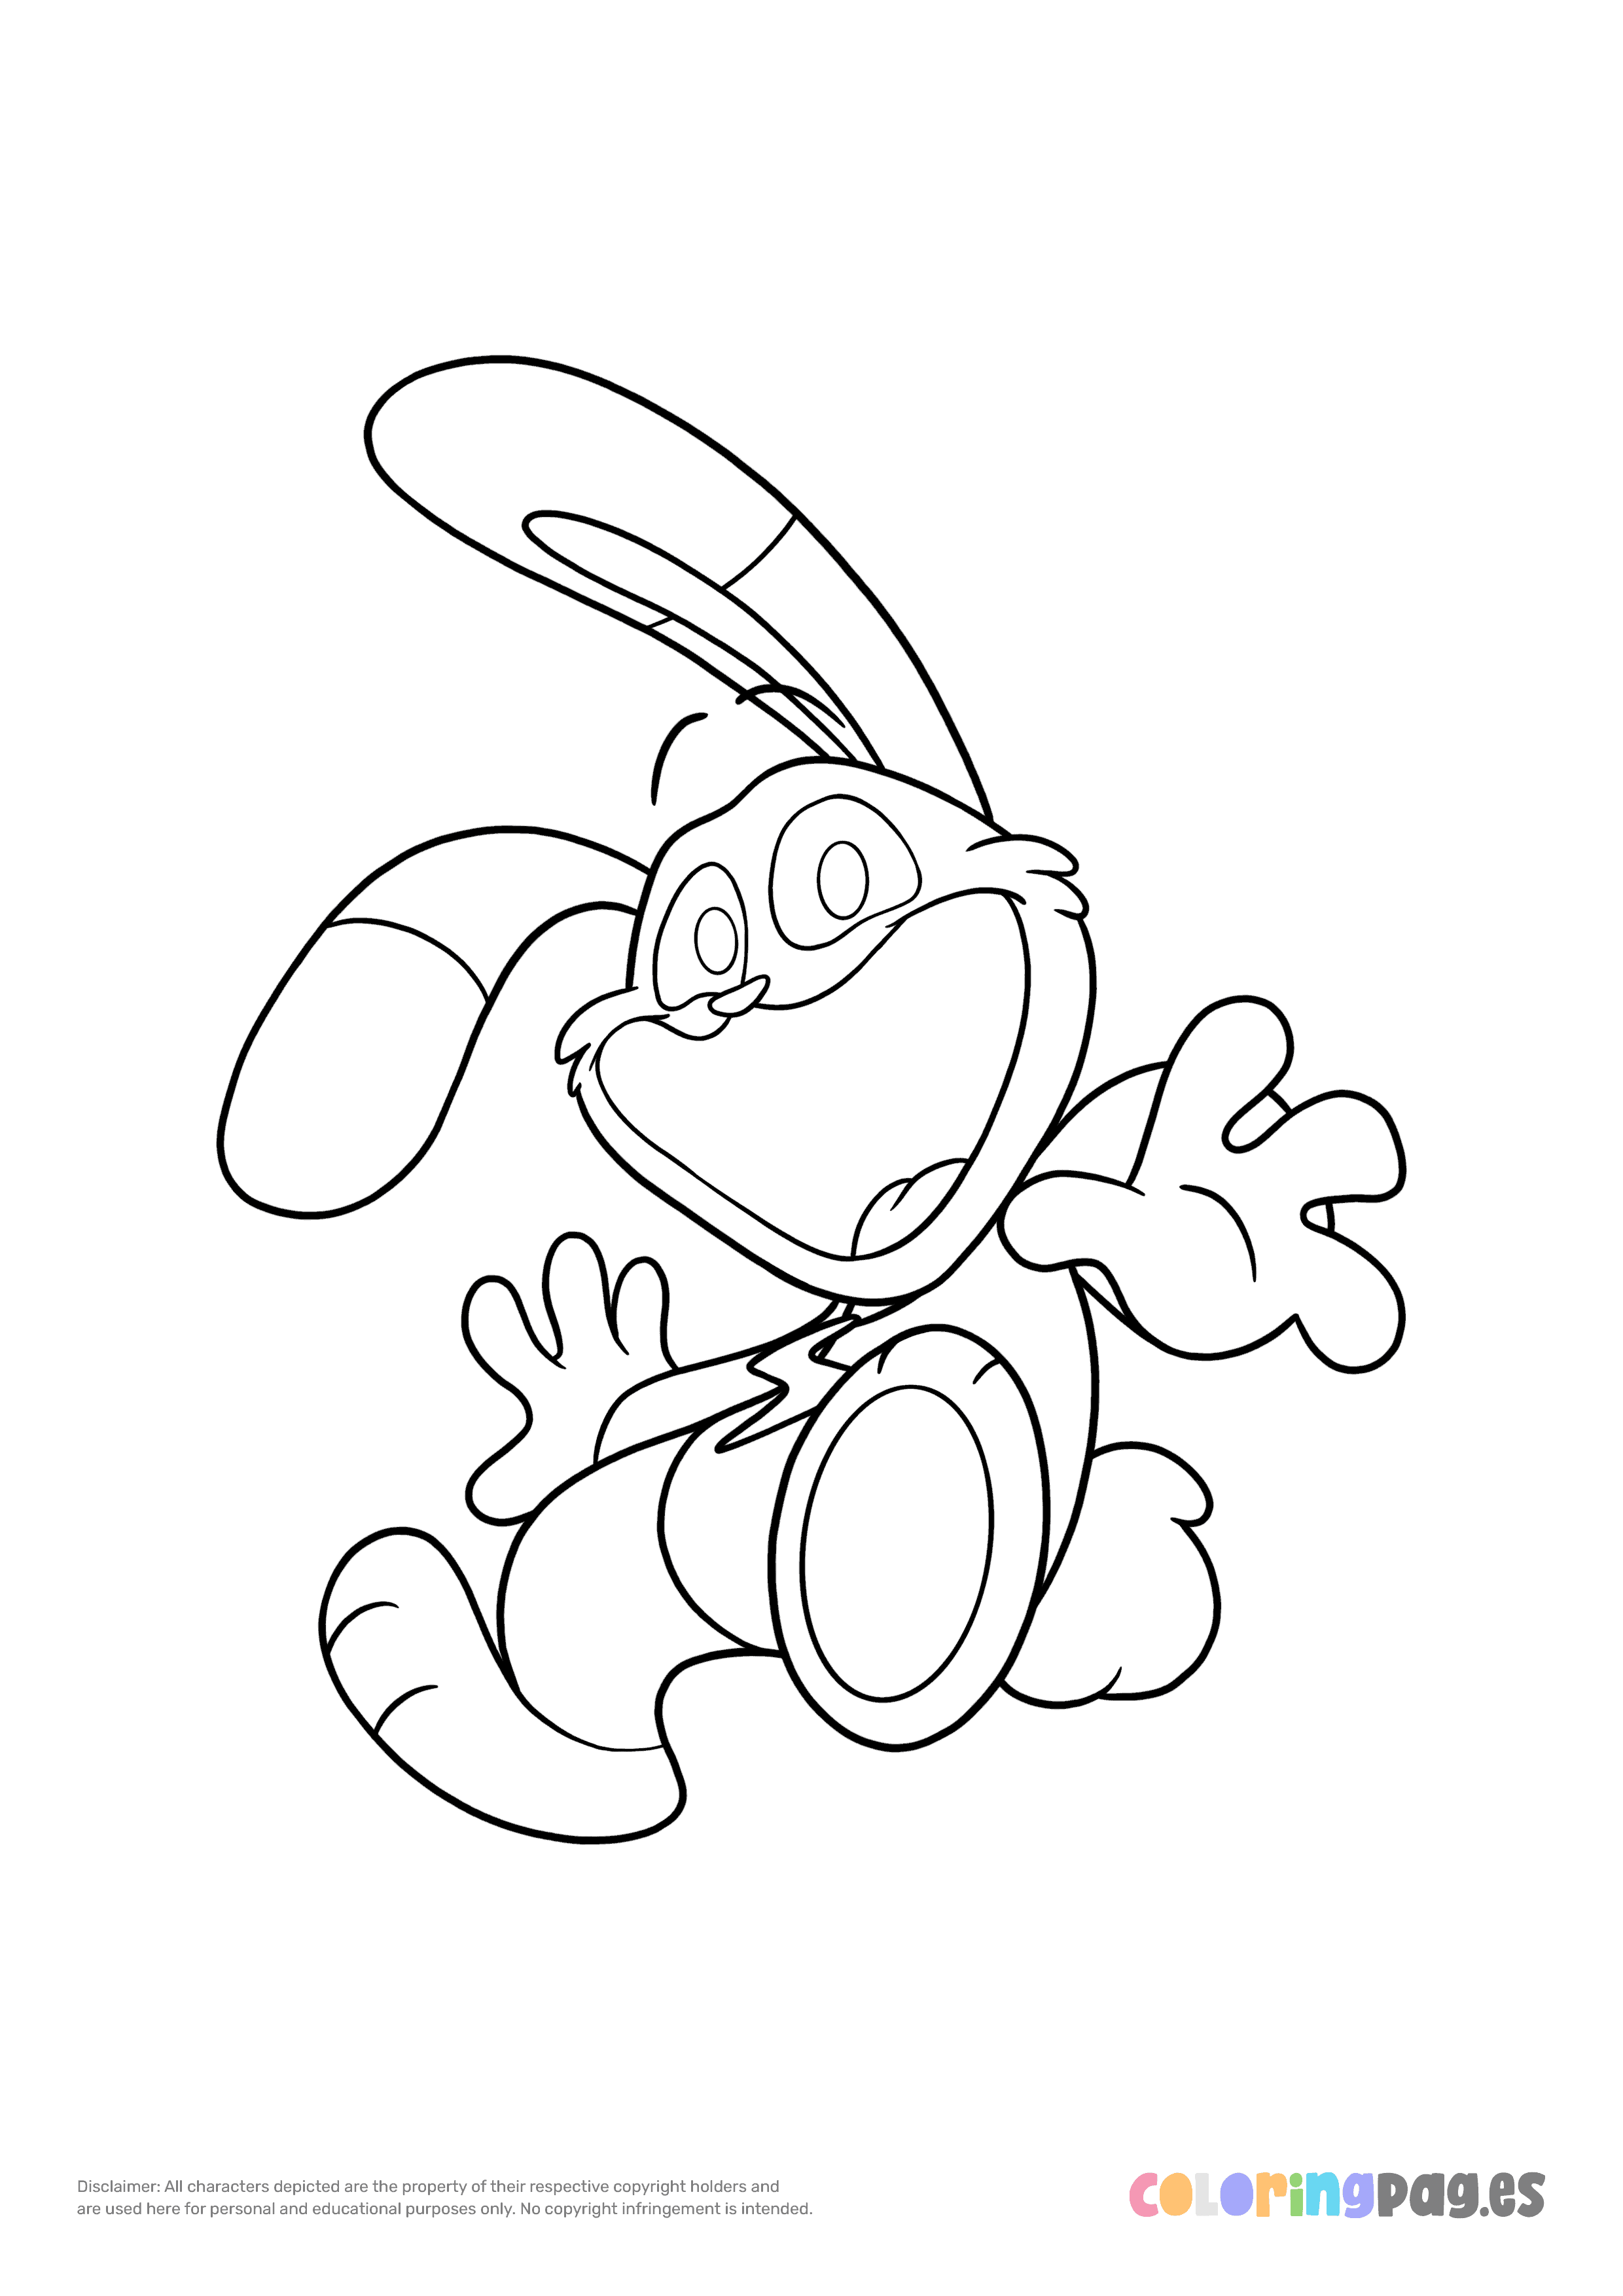 Poppy Playtime - Smiling Critters Hoppy Hopscotch coloring page